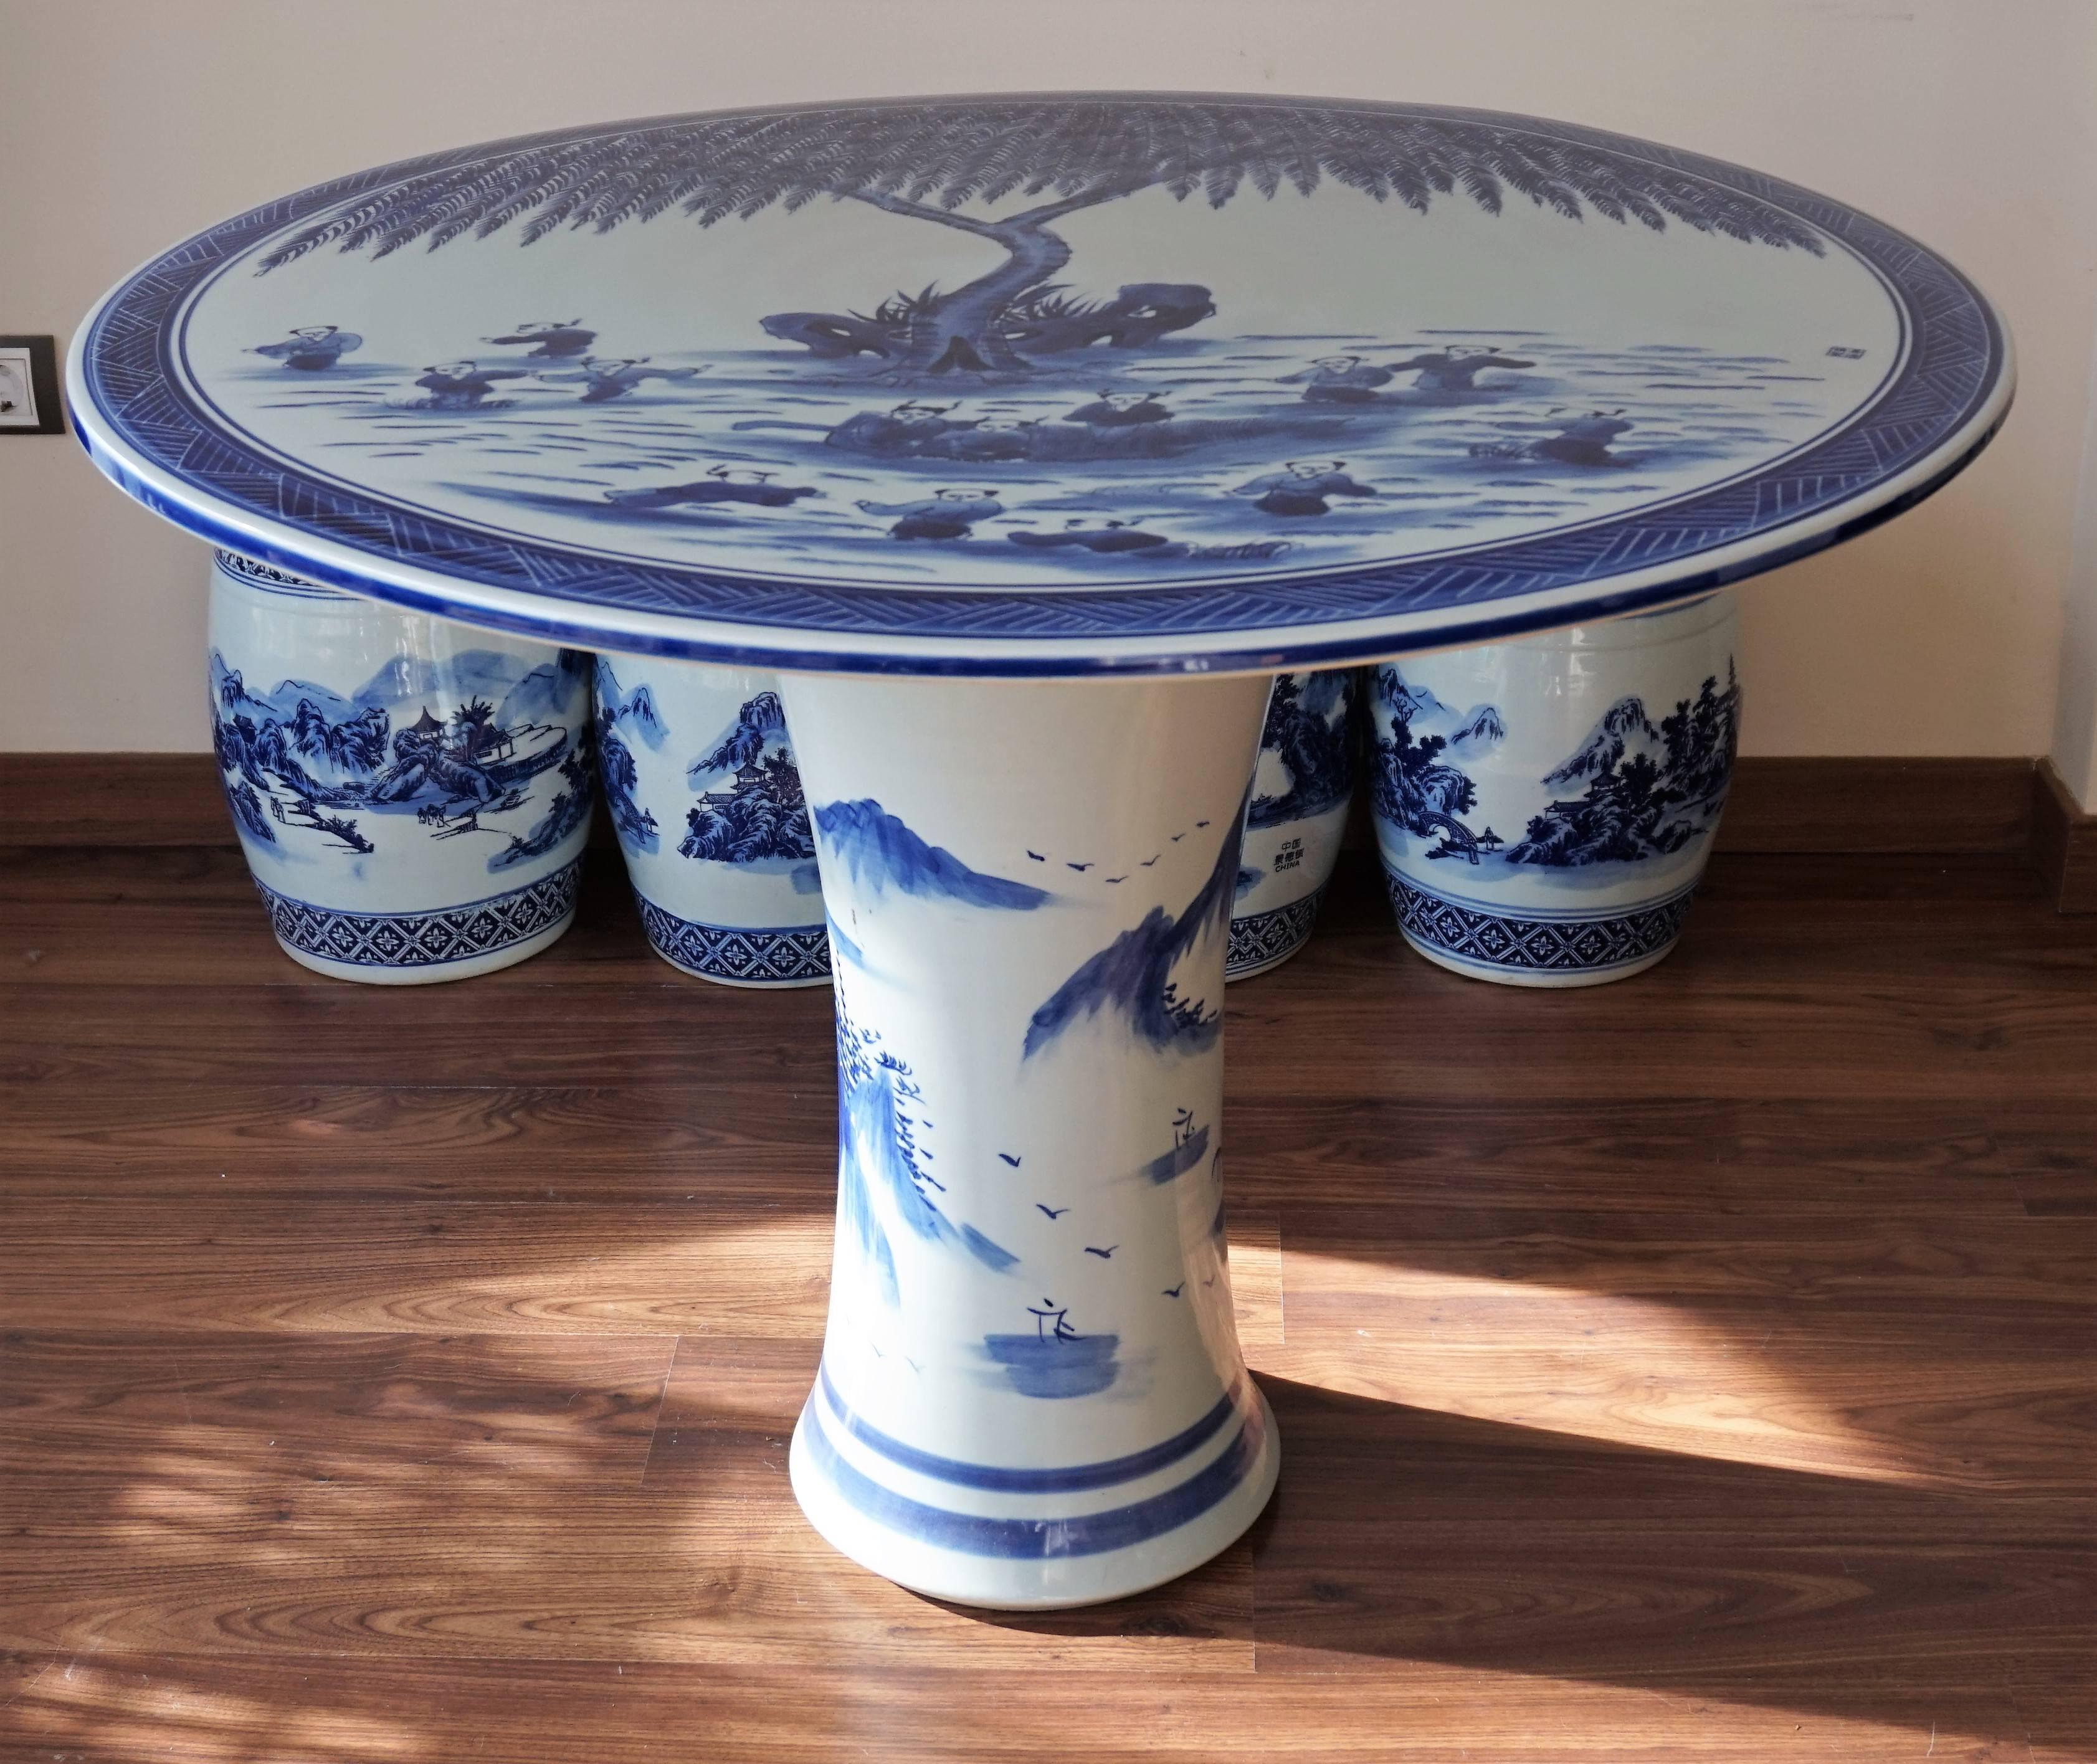 Asian Set of Chinese Porcelain Garden Seats and Table Blue and White Floral Motif